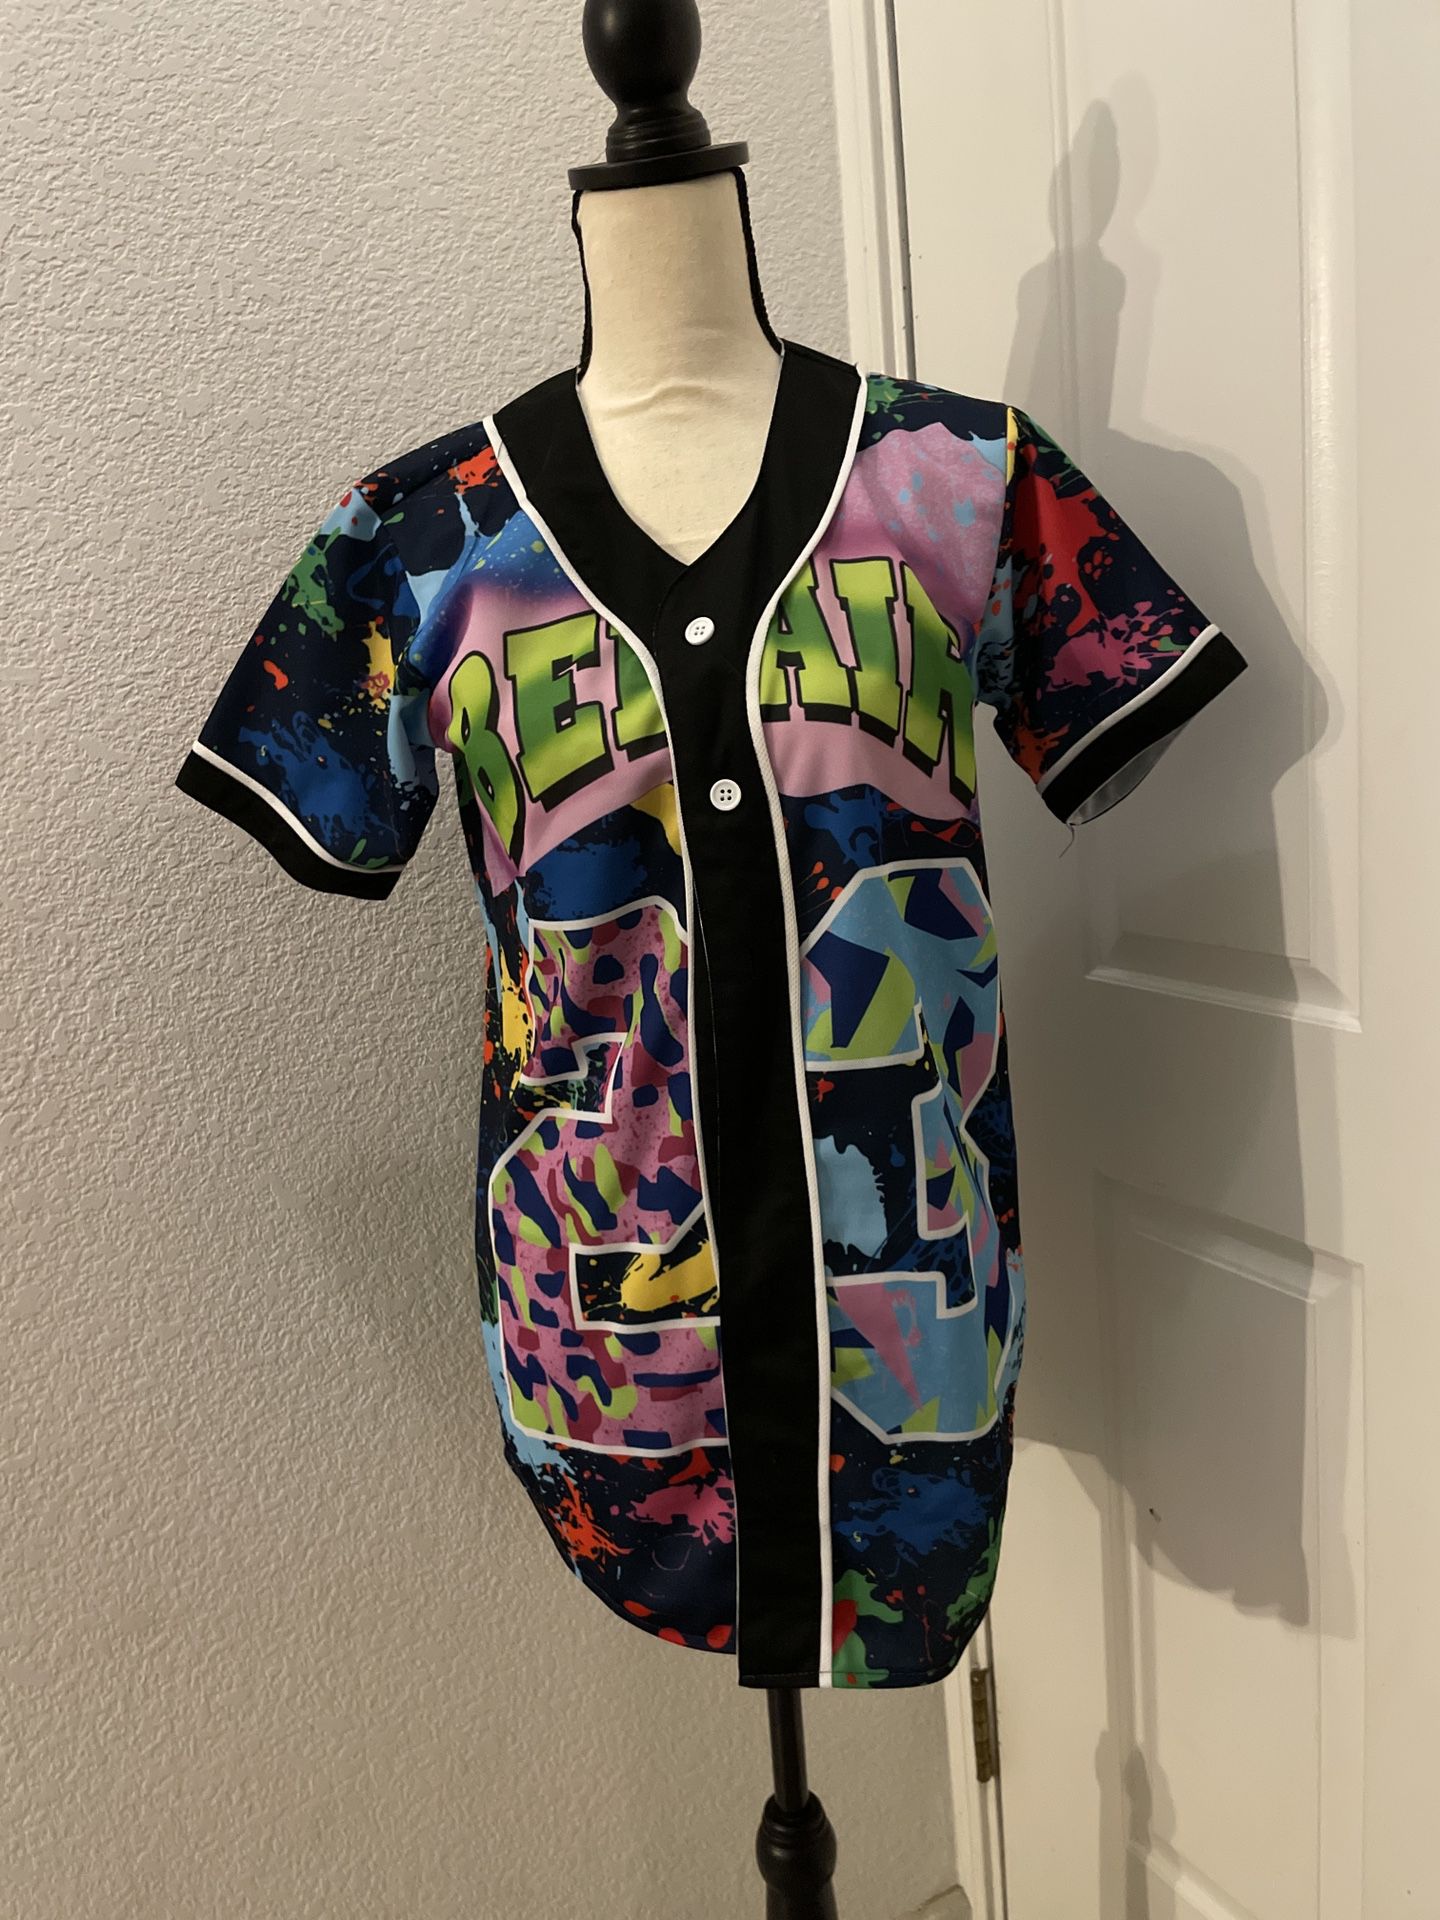 90s Outfit Bel Air 23 Baseball Jersey - Small for Sale in Sacramento, CA -  OfferUp